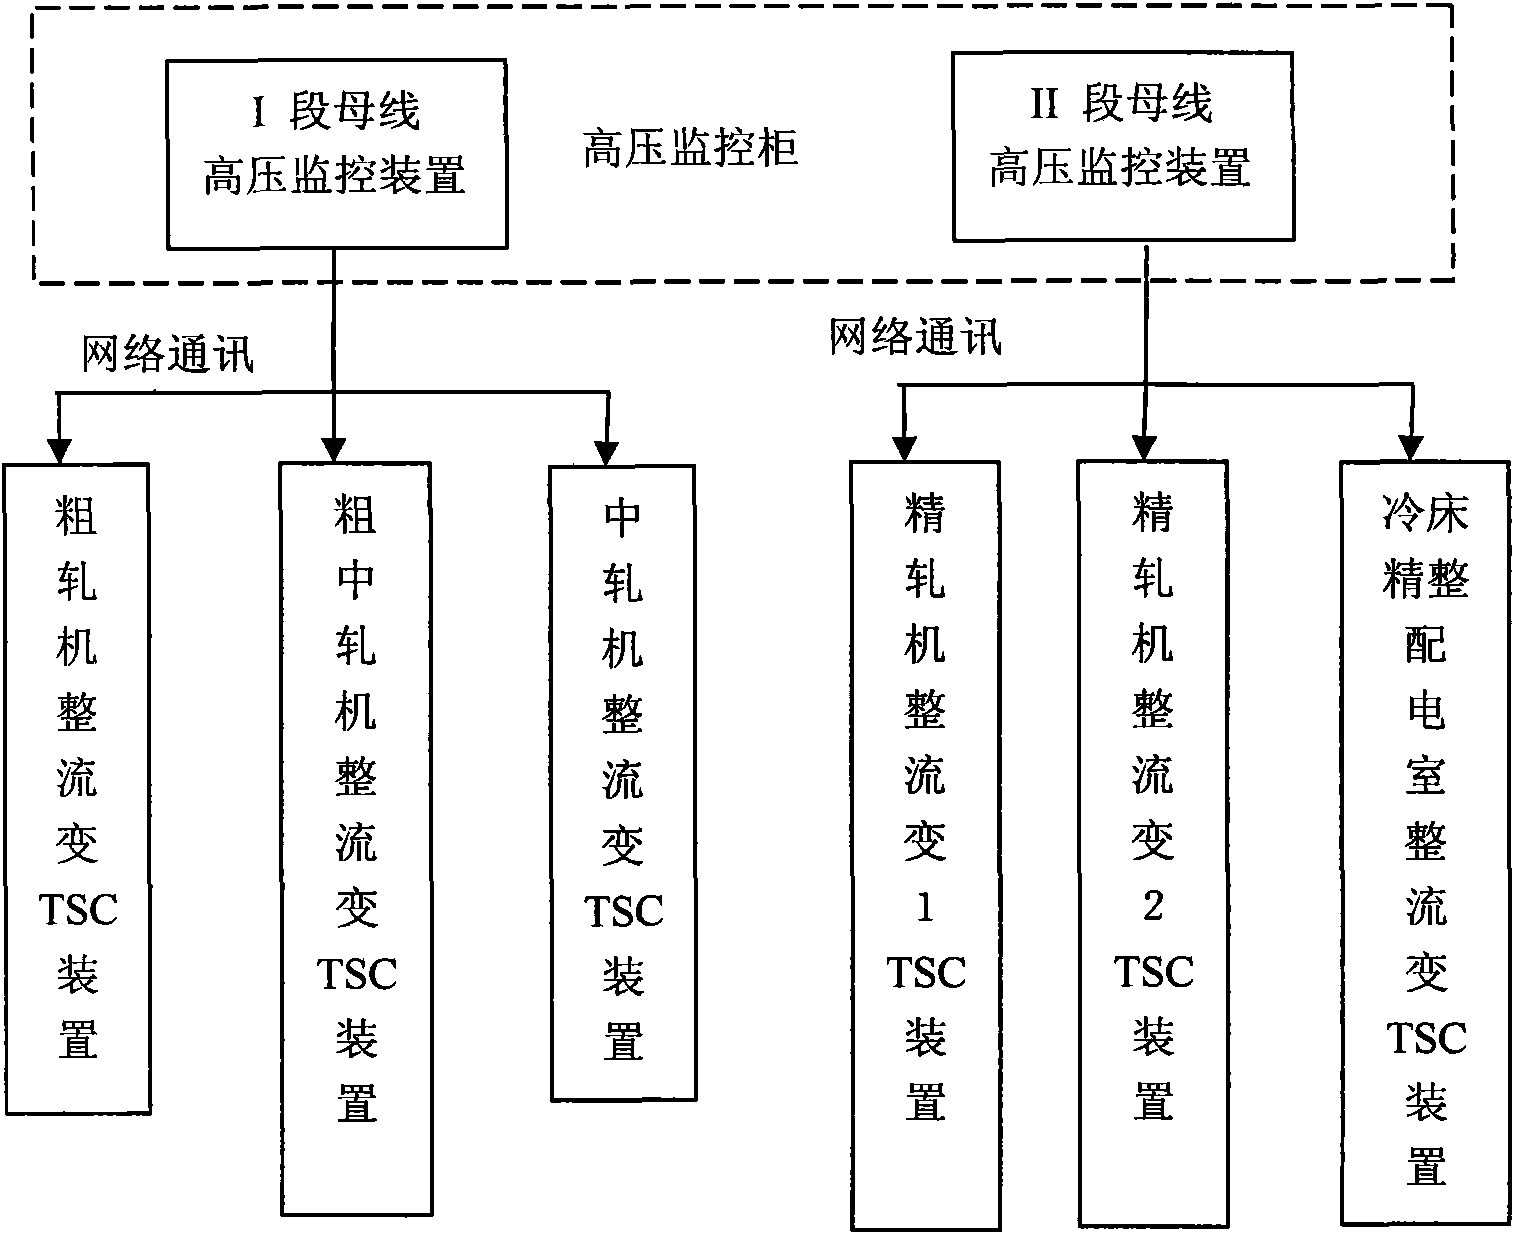 Controller of production clearance reactive power compensation device of power supply and distribution systems of small steel rolling workshop